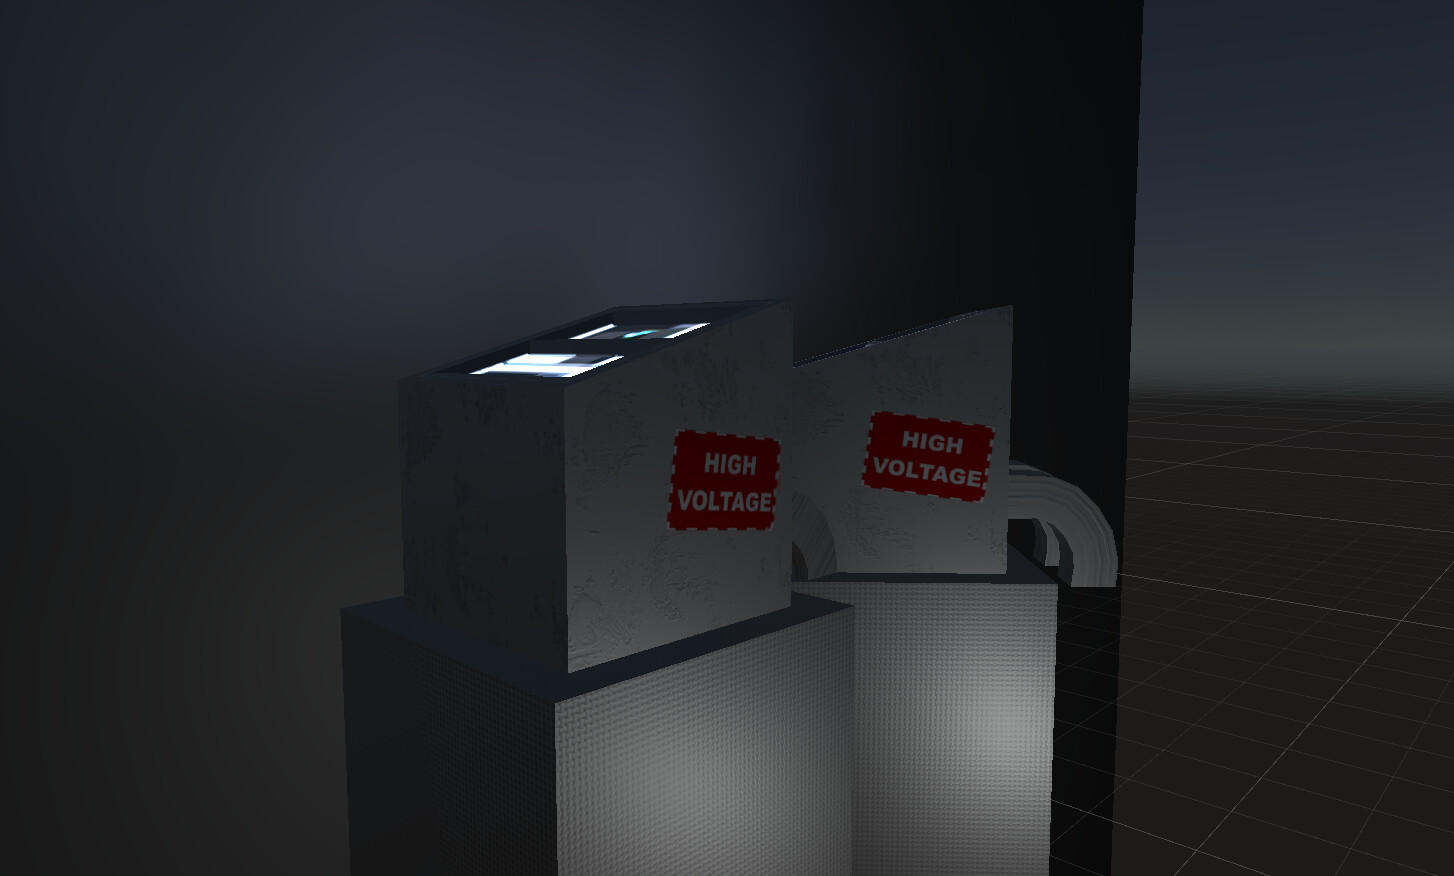 In Unity - note the emissive lighting splashed on the wall